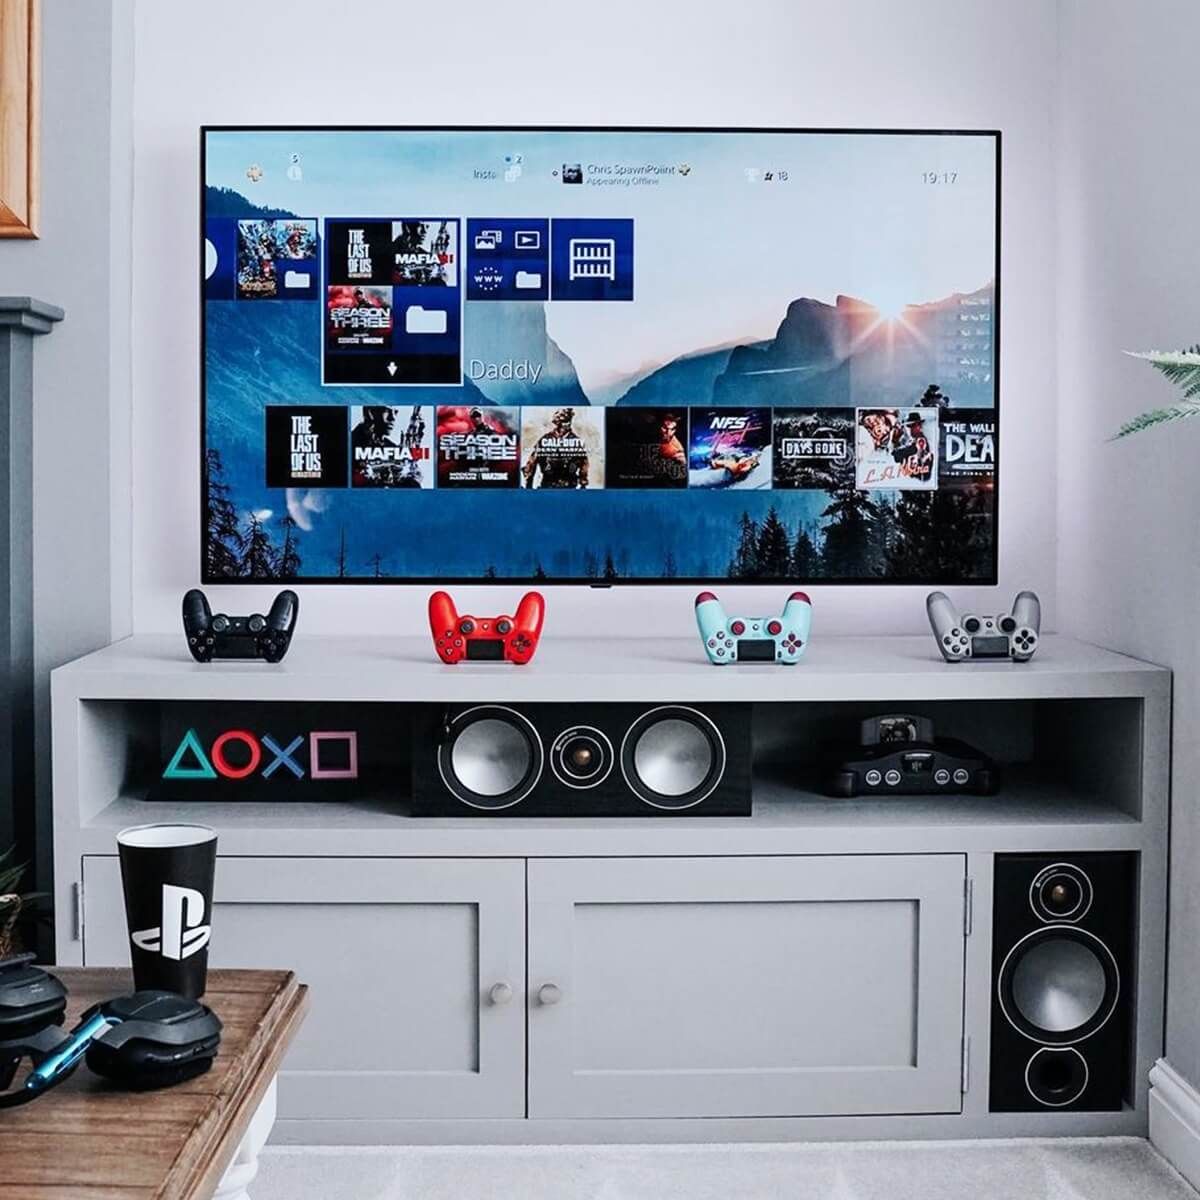 Best Gaming Entertainment Centers & Tv Stand Setup Ideas | Gridfiti Inside Rgb Tv Entertainment Centers (Gallery 18 of 20)